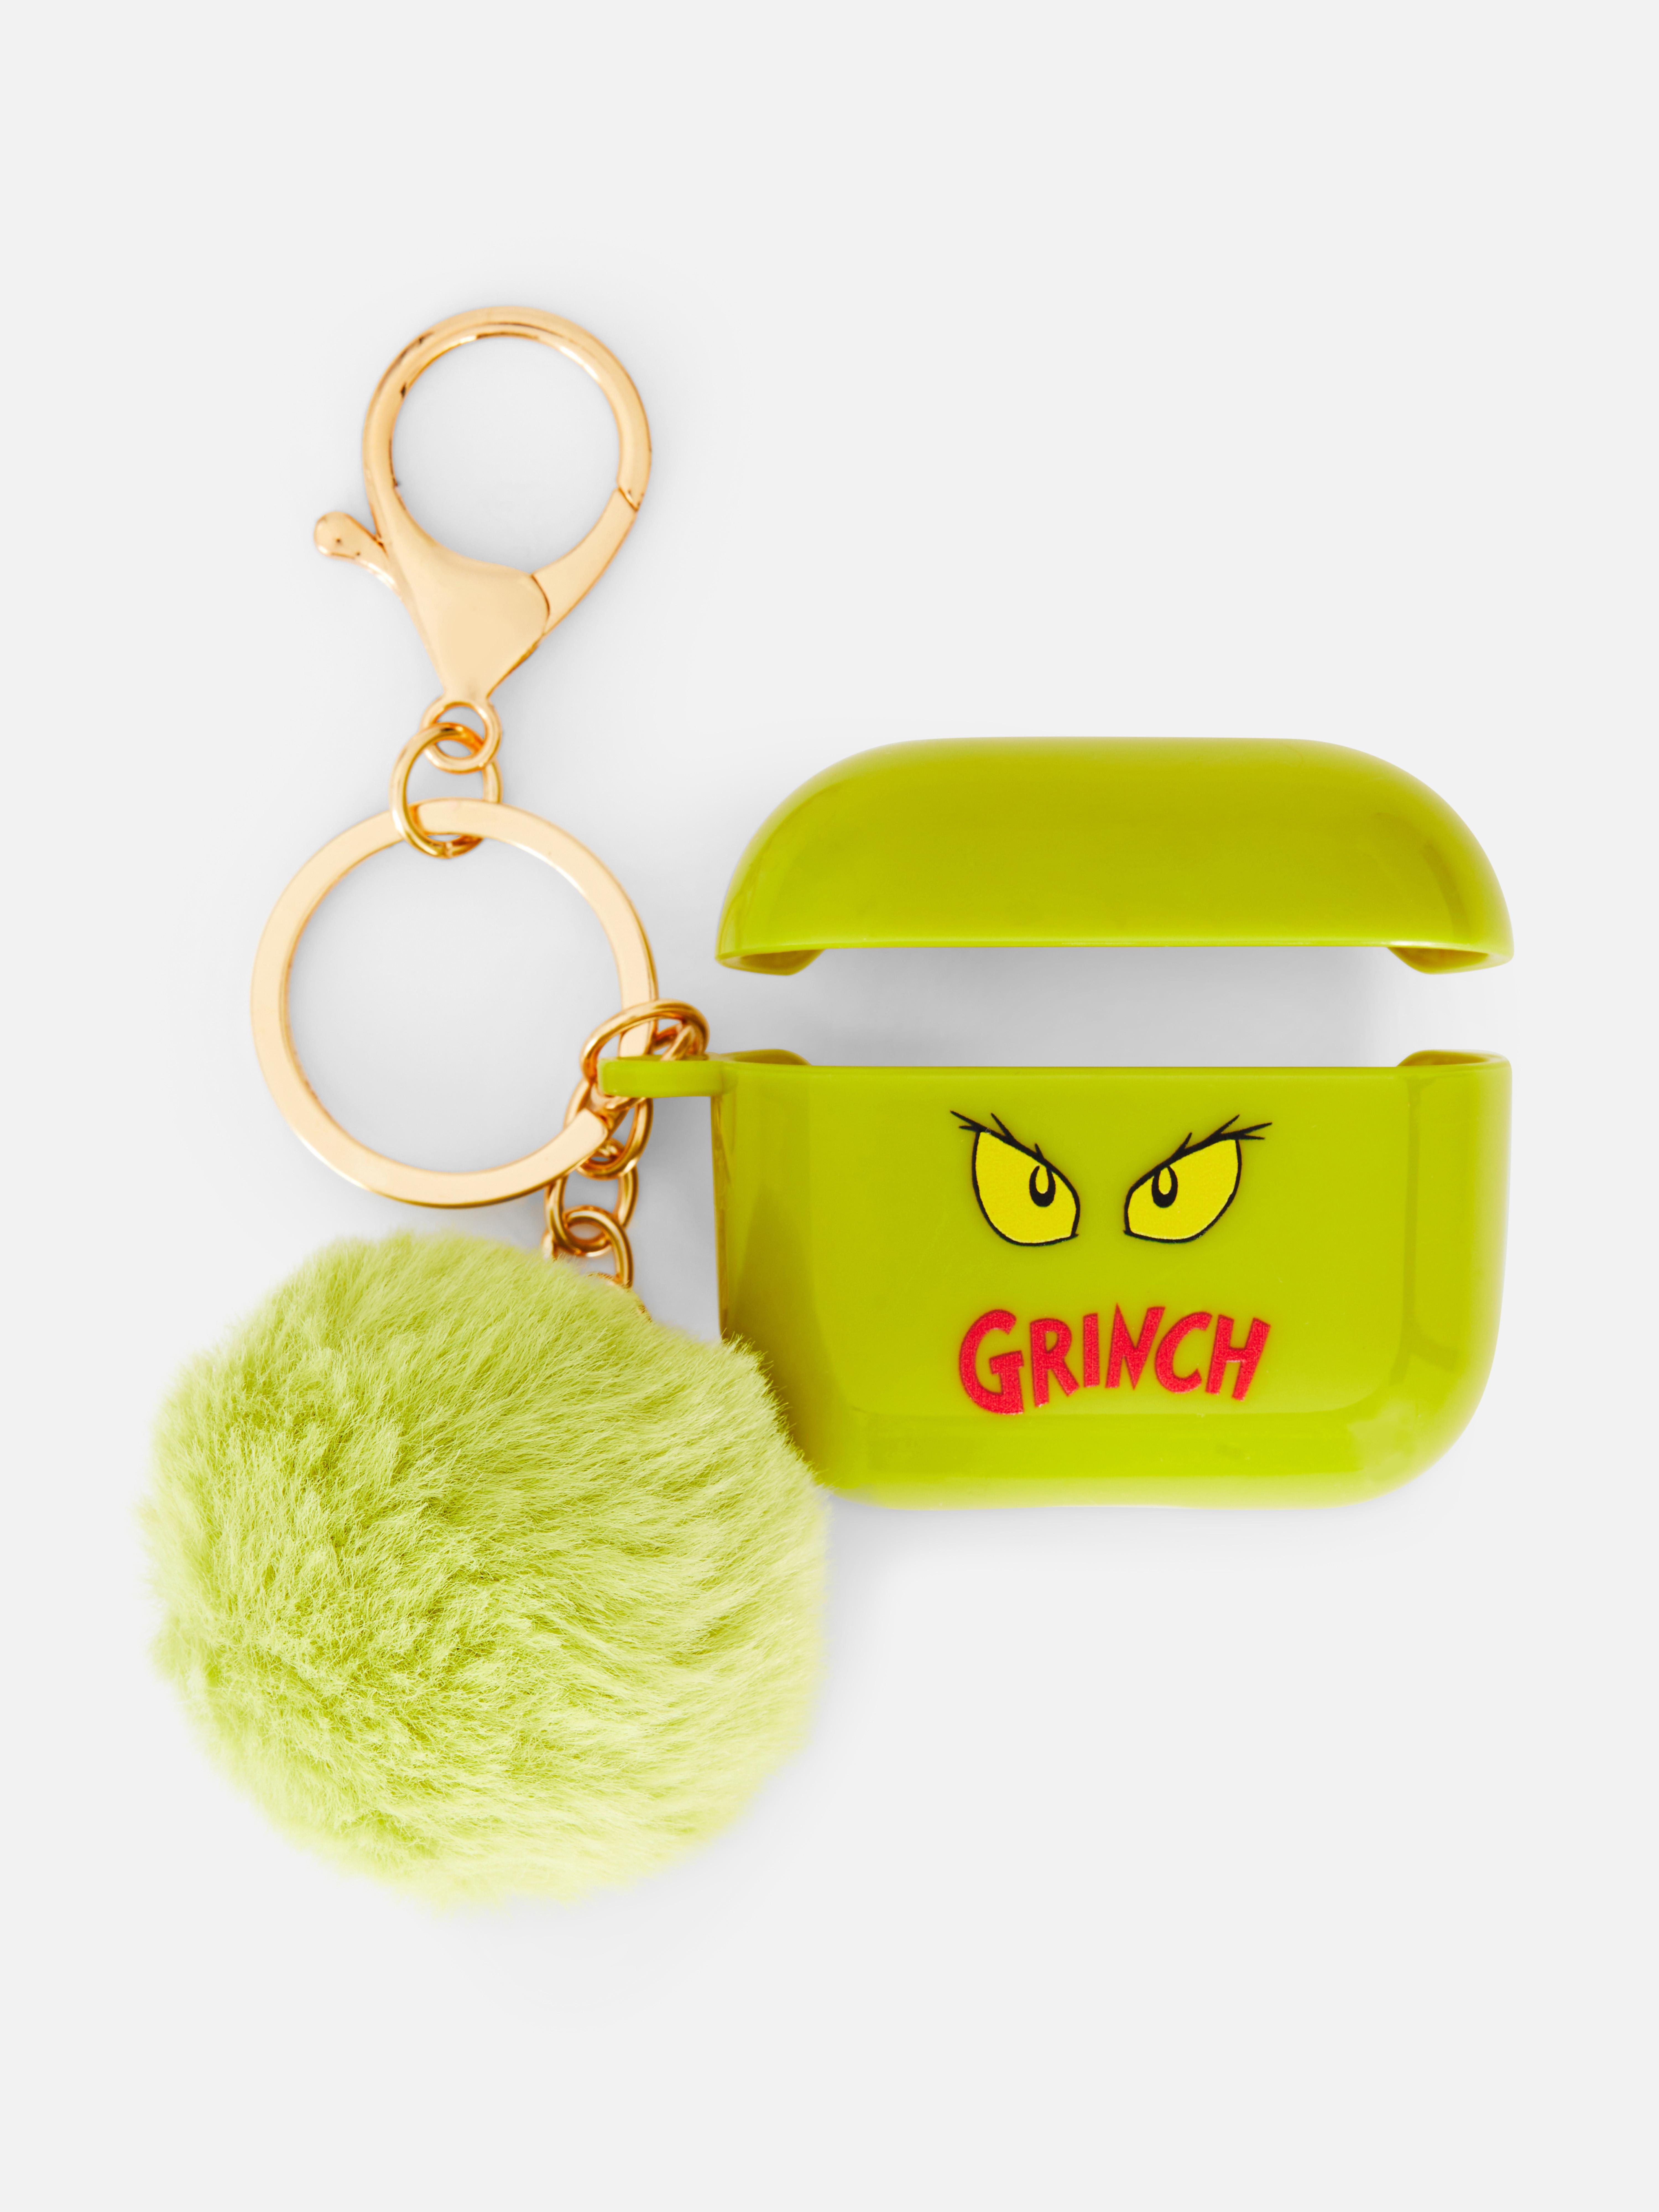 The Grinch Wireless Earbuds Case